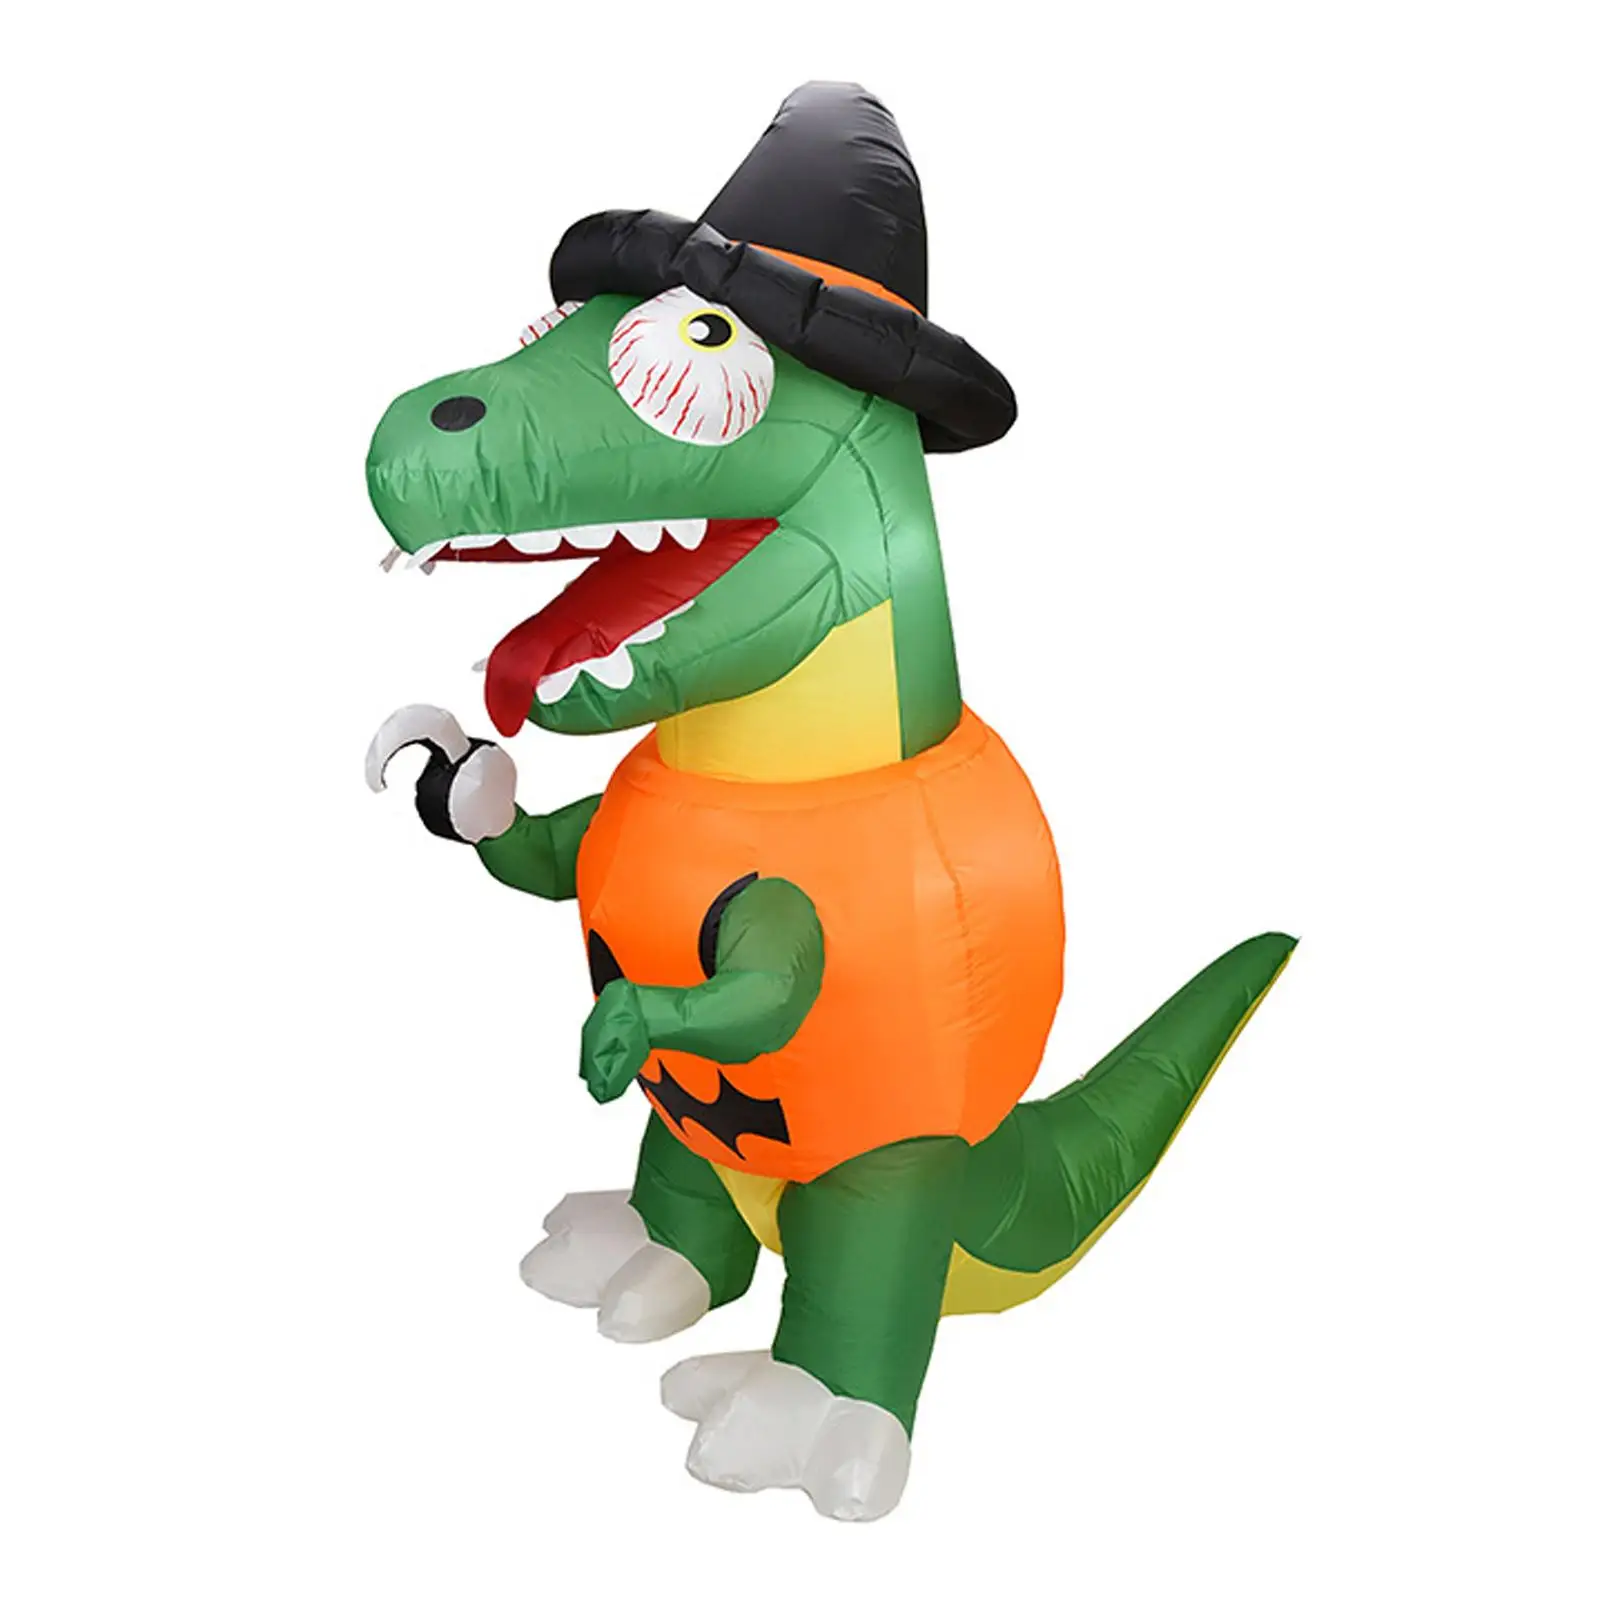 5.9 ft Tall Halloween Inflatable Pumpkin Dinosaur Lighted Inflatable with Stakes for Lawn Home Halloween Outdoor Decor